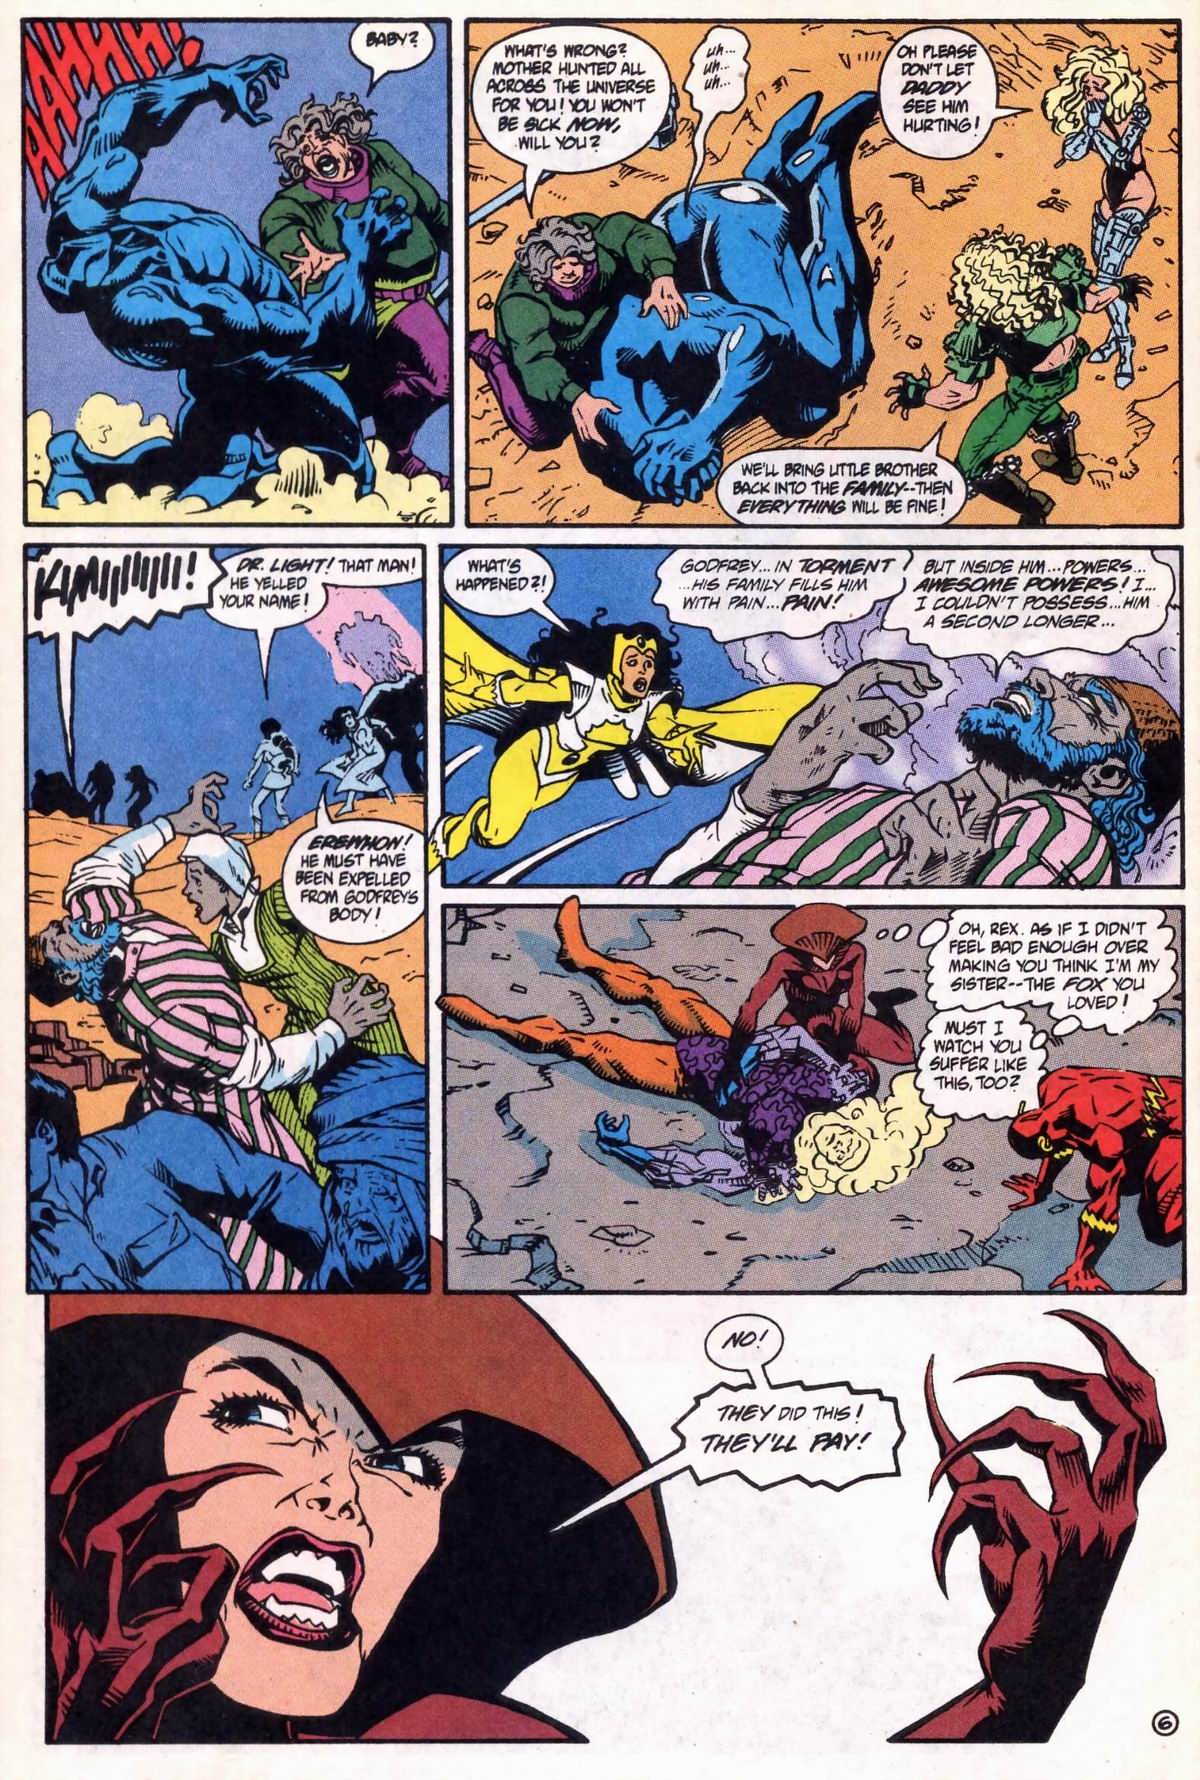 Justice League International (1993) 62 Page 7